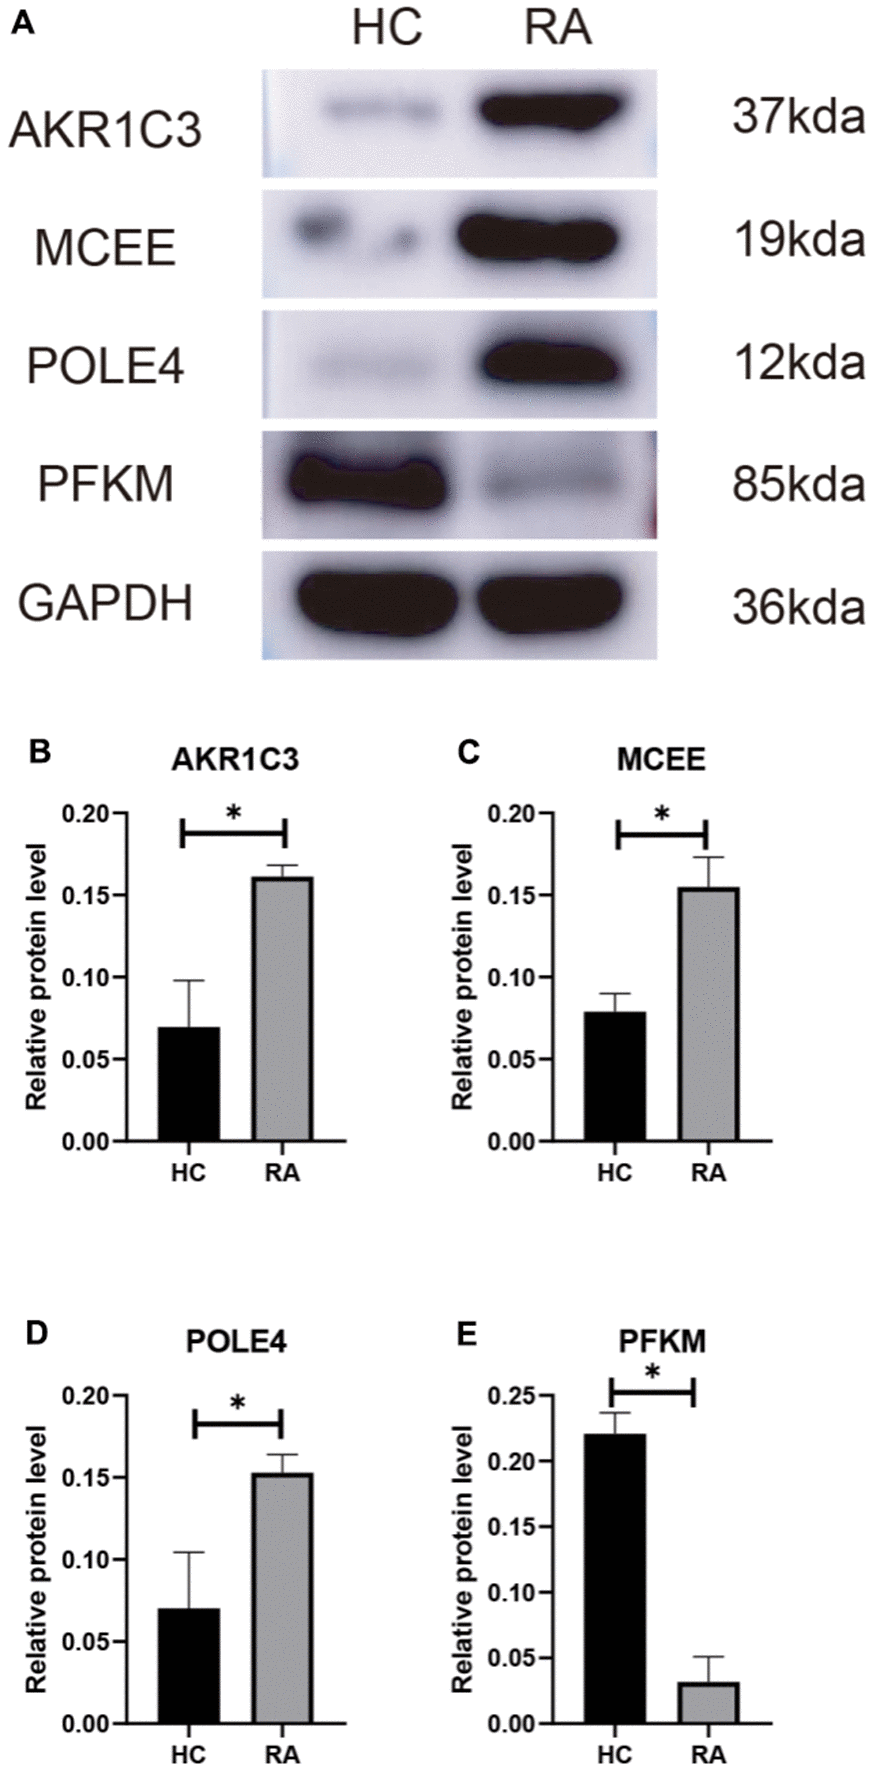 (A) Validation of 4 diagnostic feature biomarkers in clinical tissues via western blot analysis. The expression of (B) AKR1C3, (C) MCEE, (D) POLE4 and (E) PFKM. Statistical significance: *P 